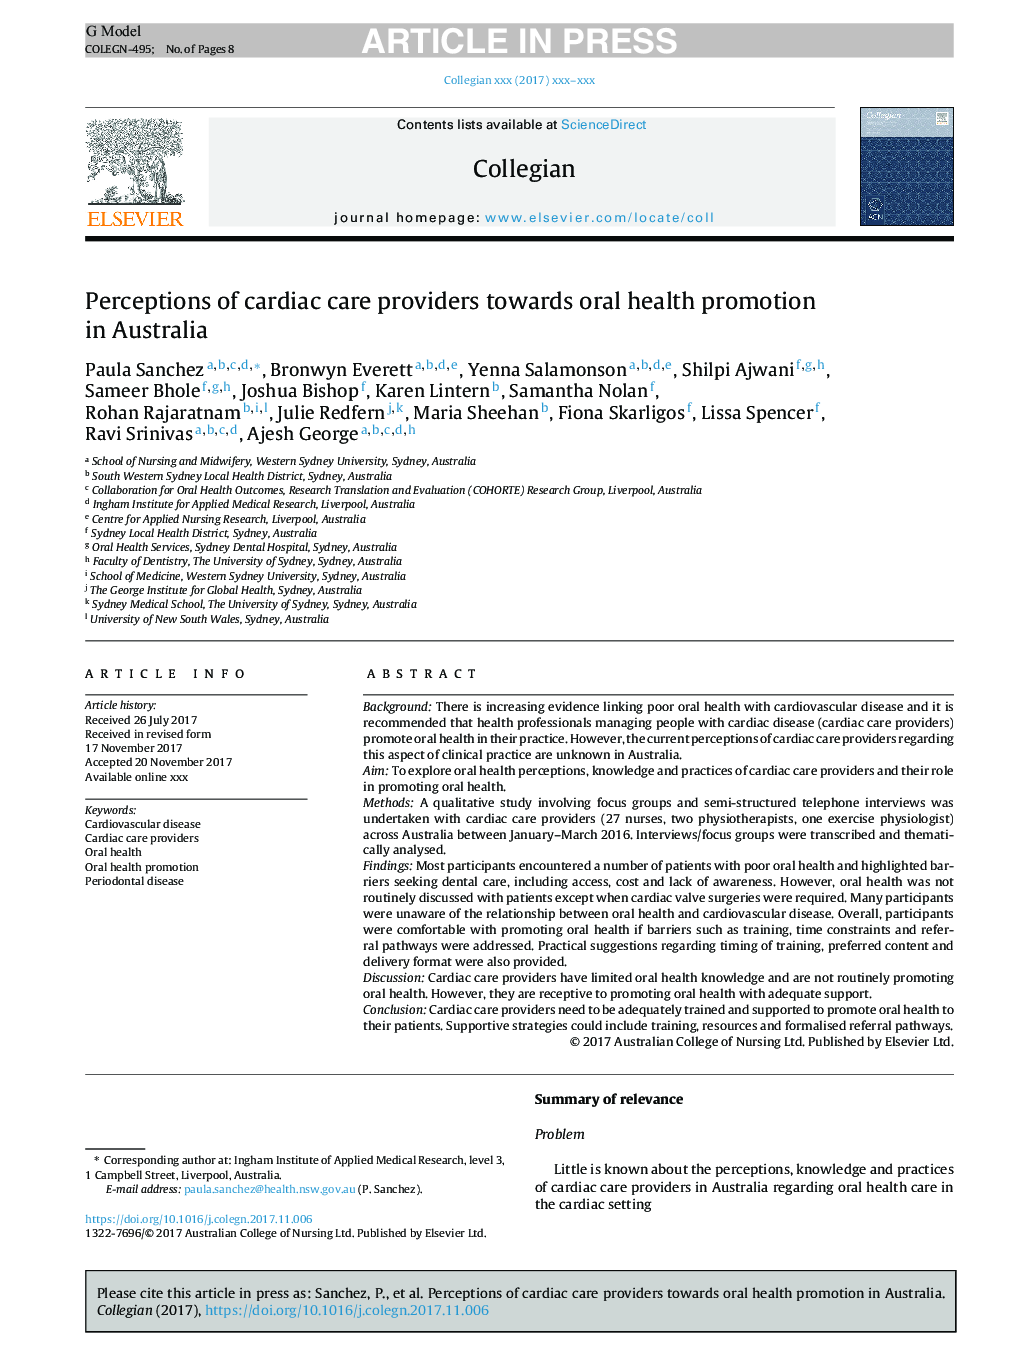 Perceptions of cardiac care providers towards oral health promotion in Australia